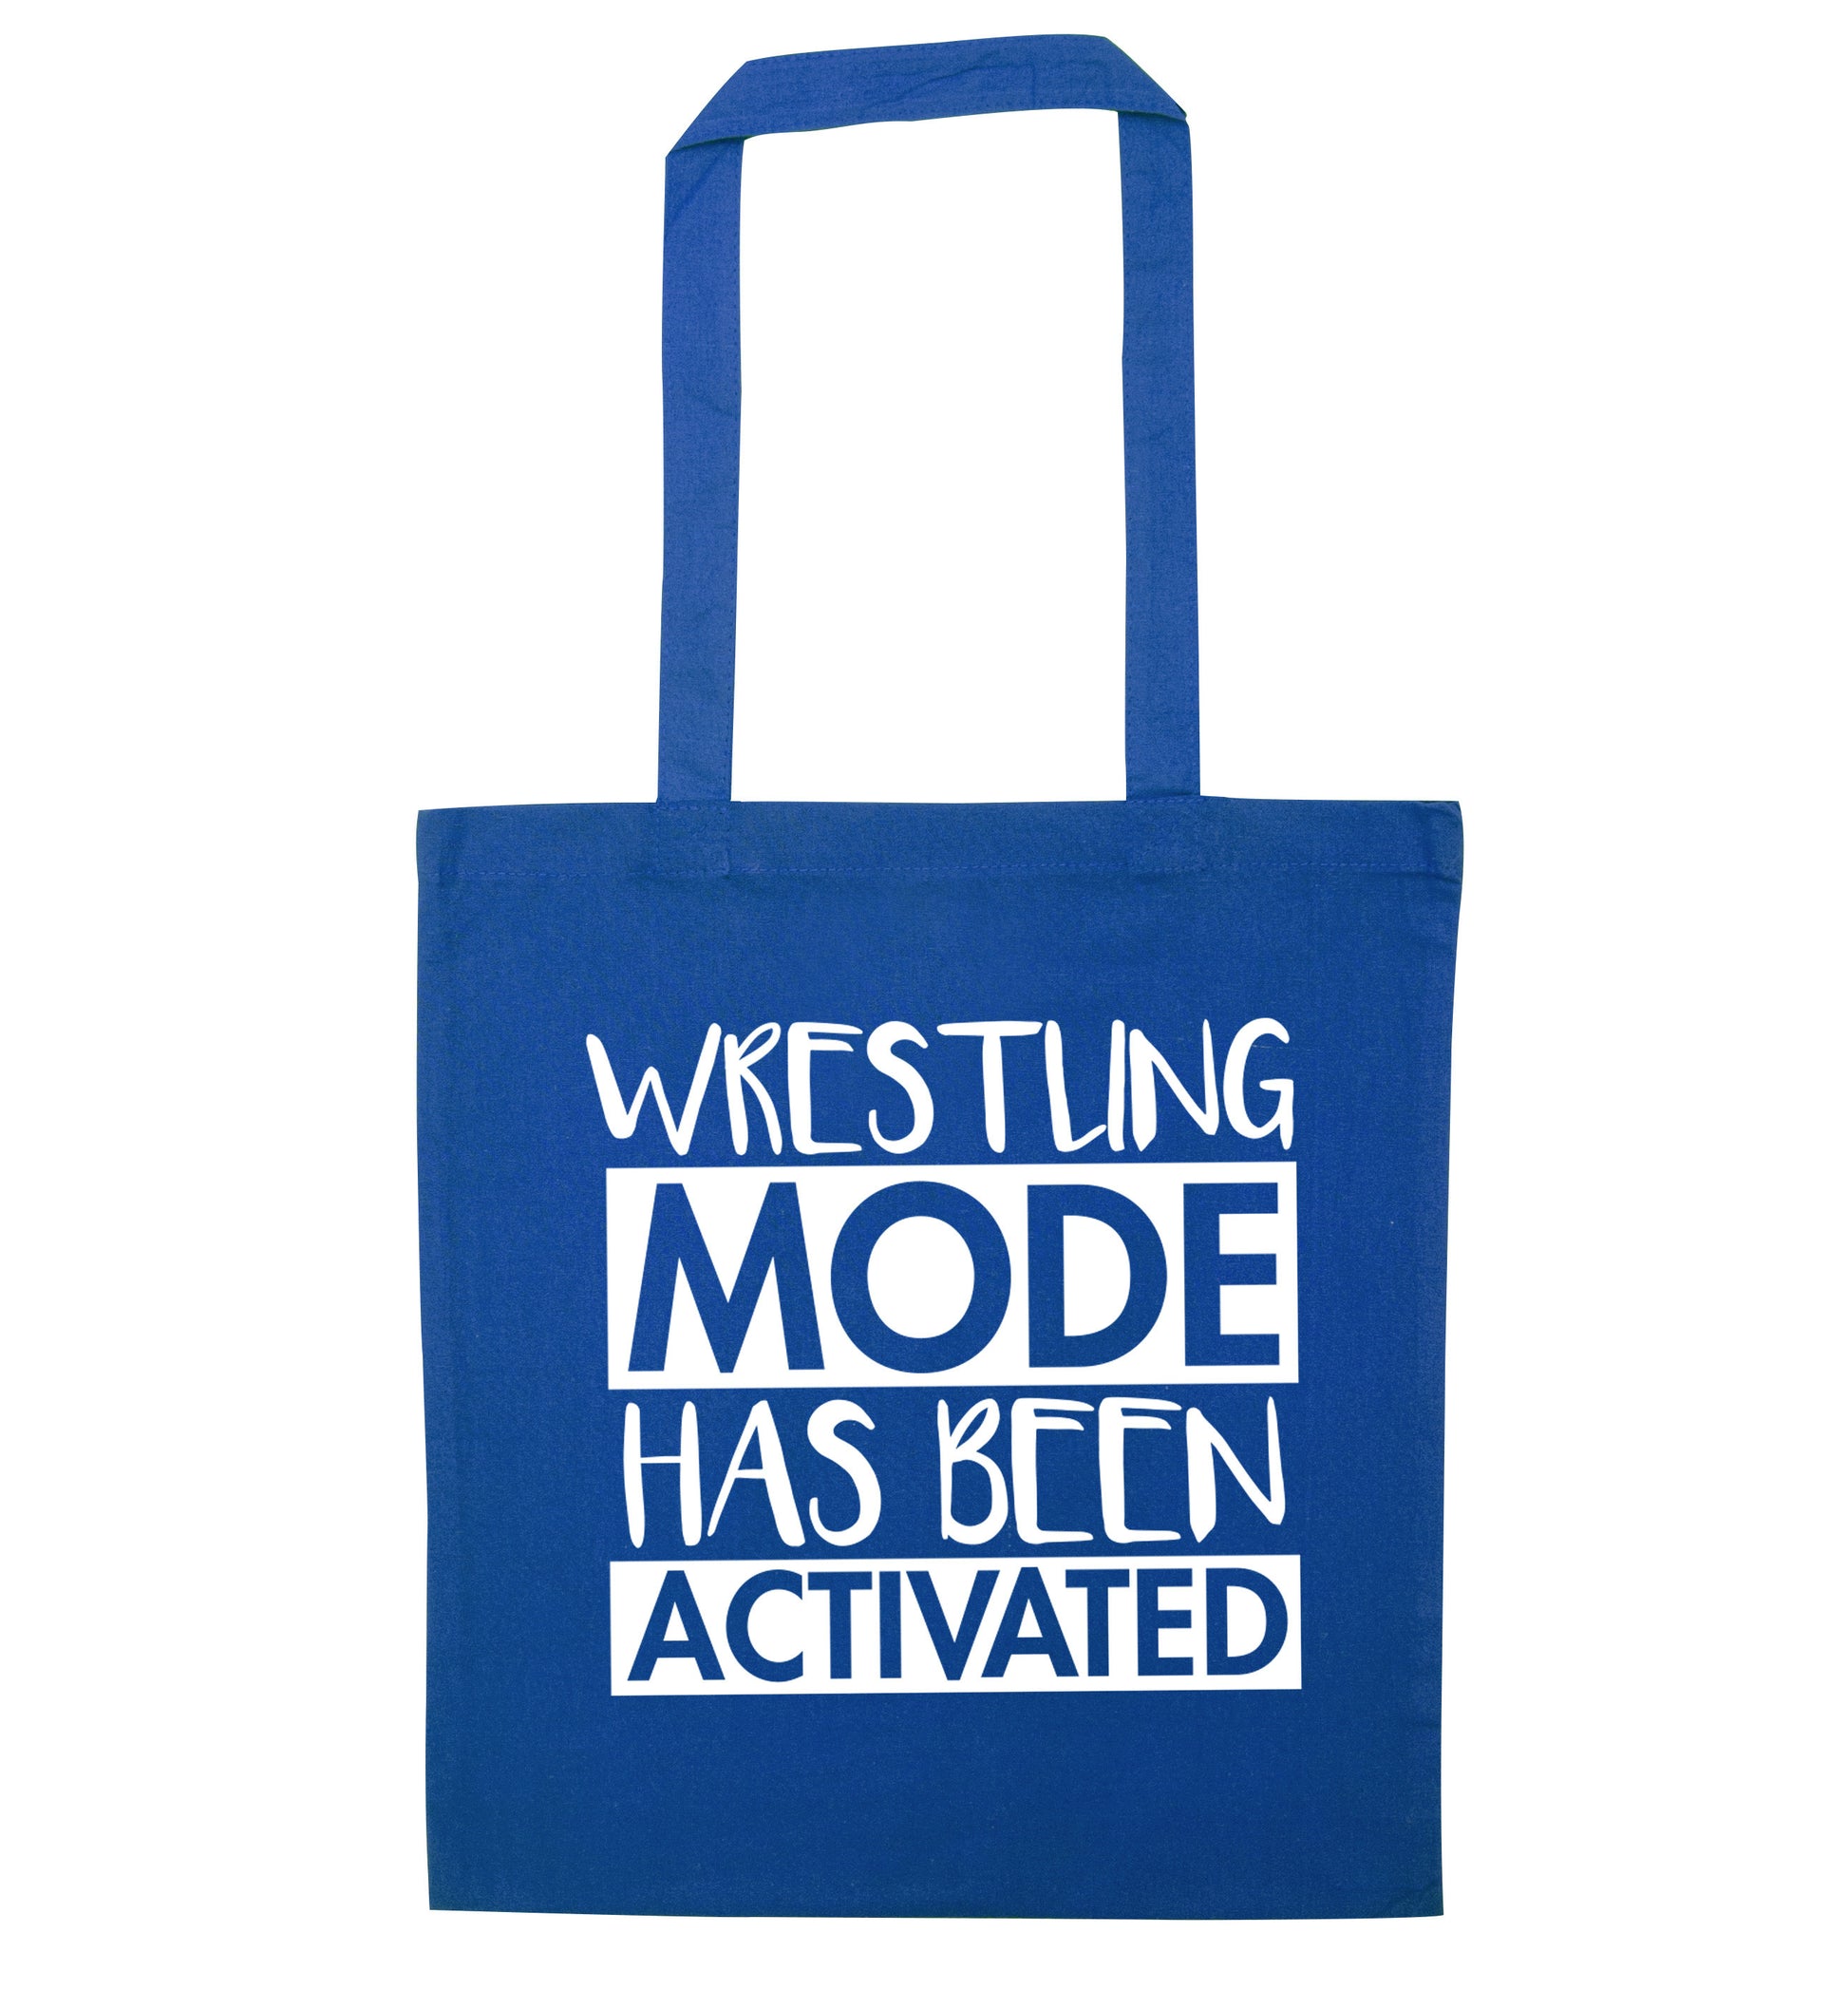 Wresting mode activated blue tote bag